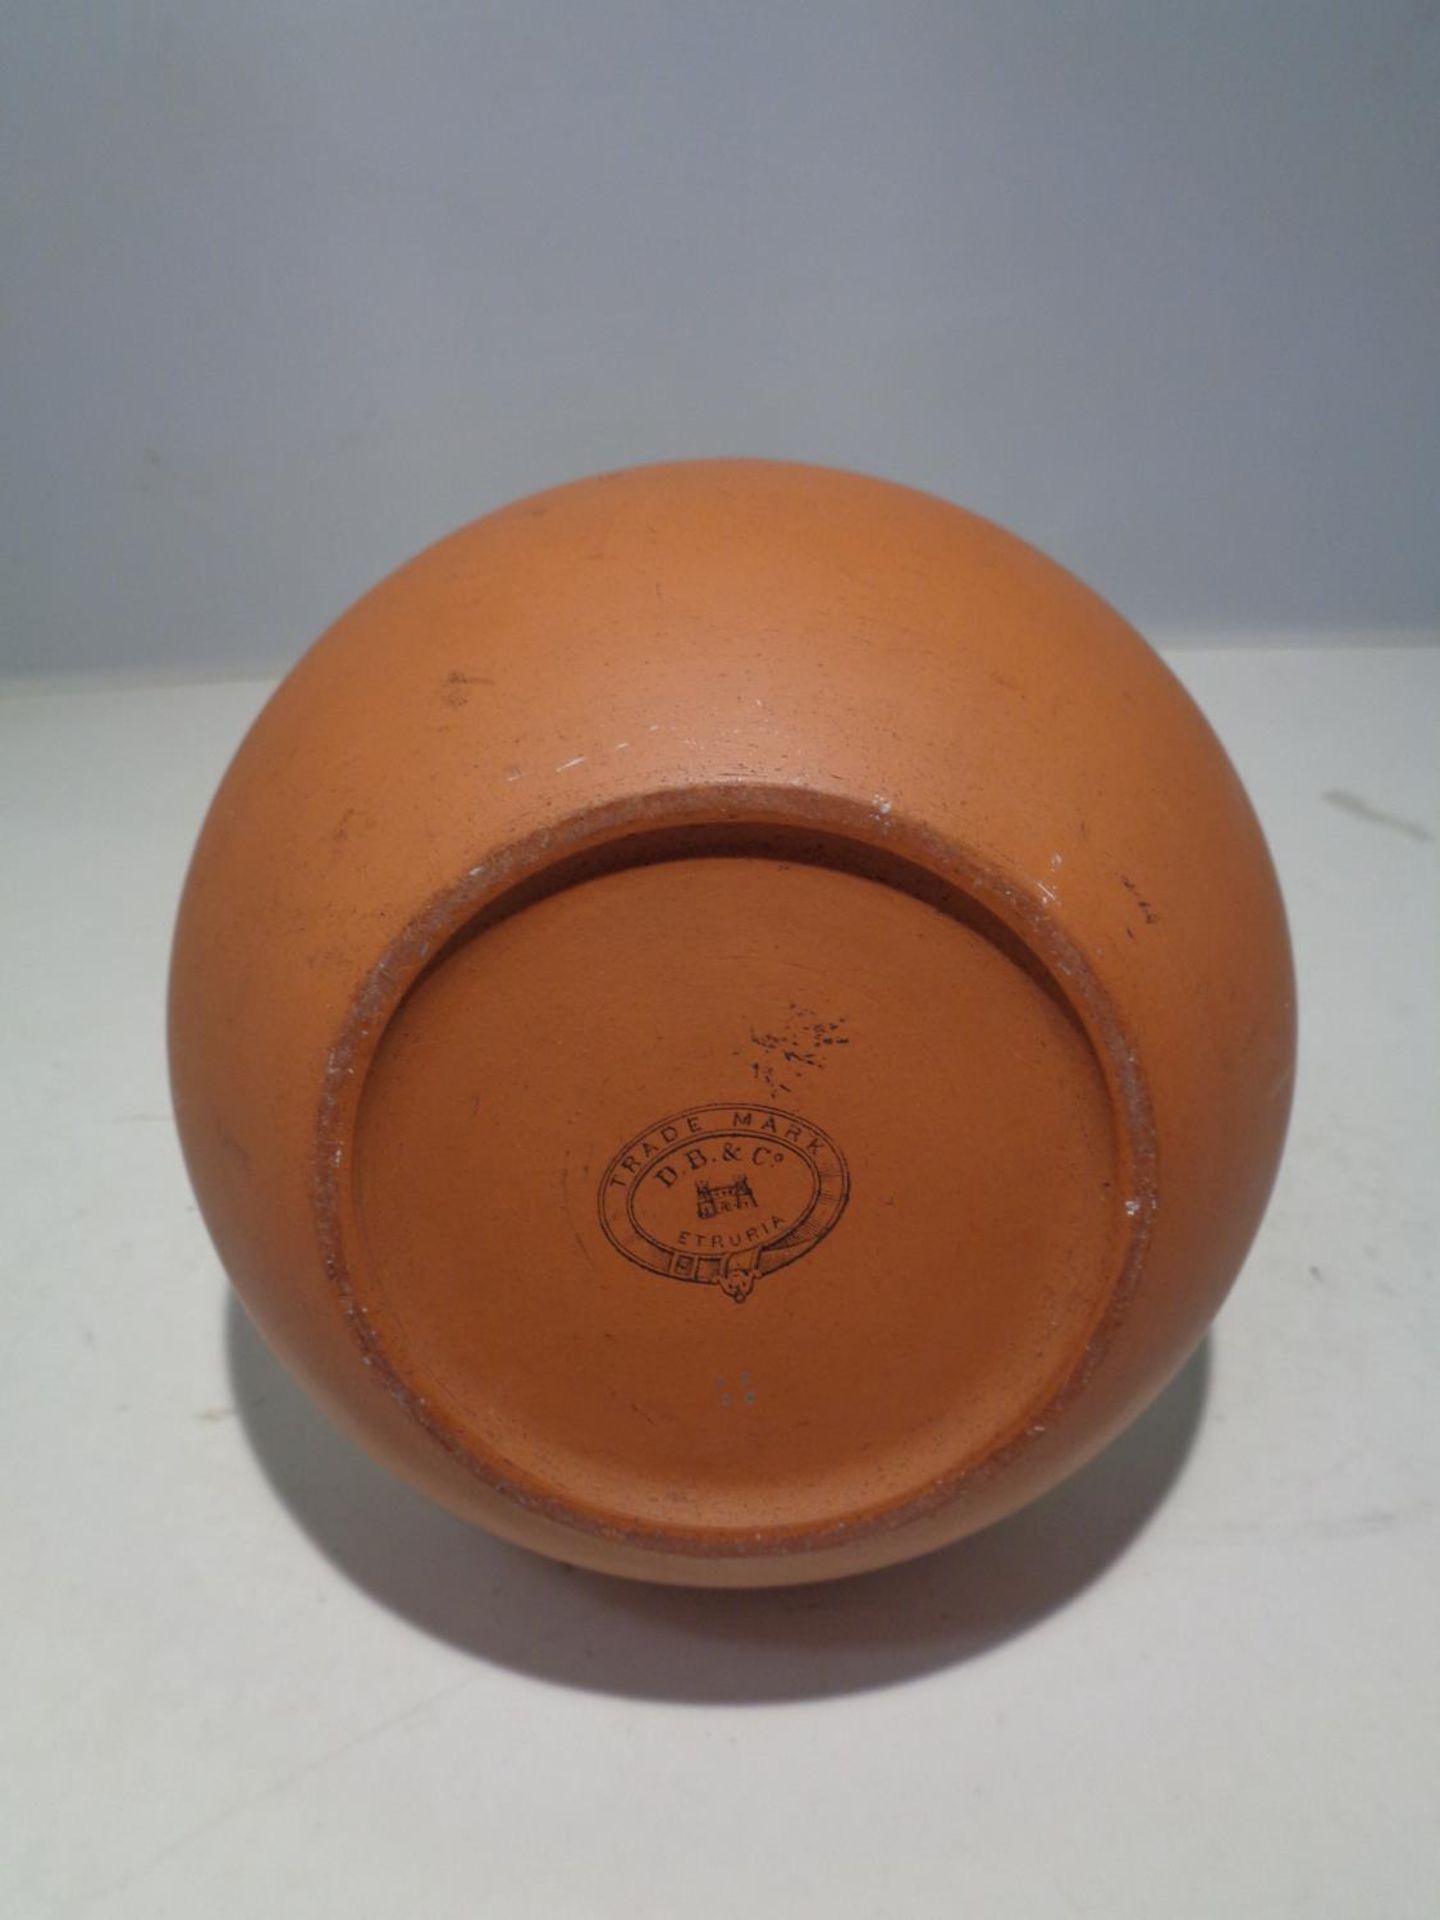 A DB &CO ETRURIA TERRACOTTA VASE WITH A FLOWER DESIGN - Image 4 of 4